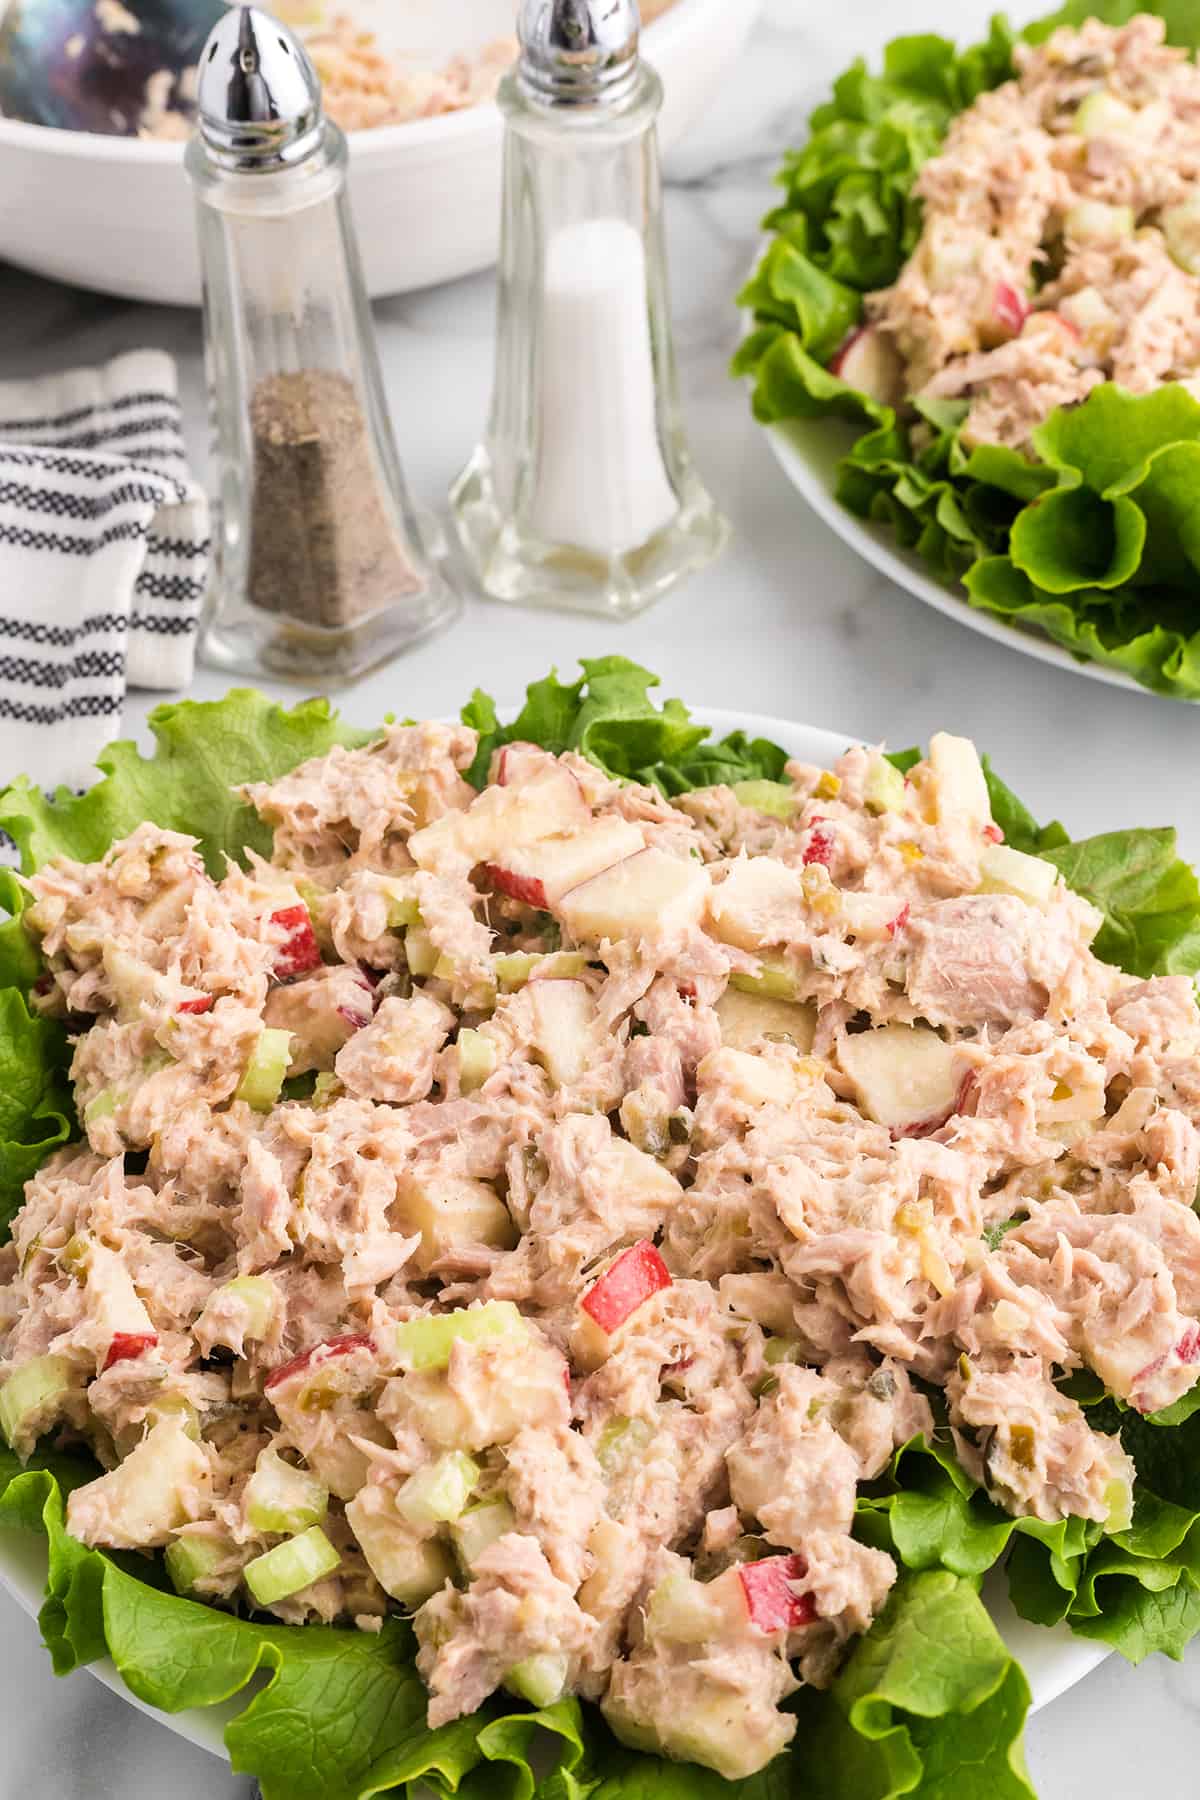 Tuna salad on a bed of lettuce.